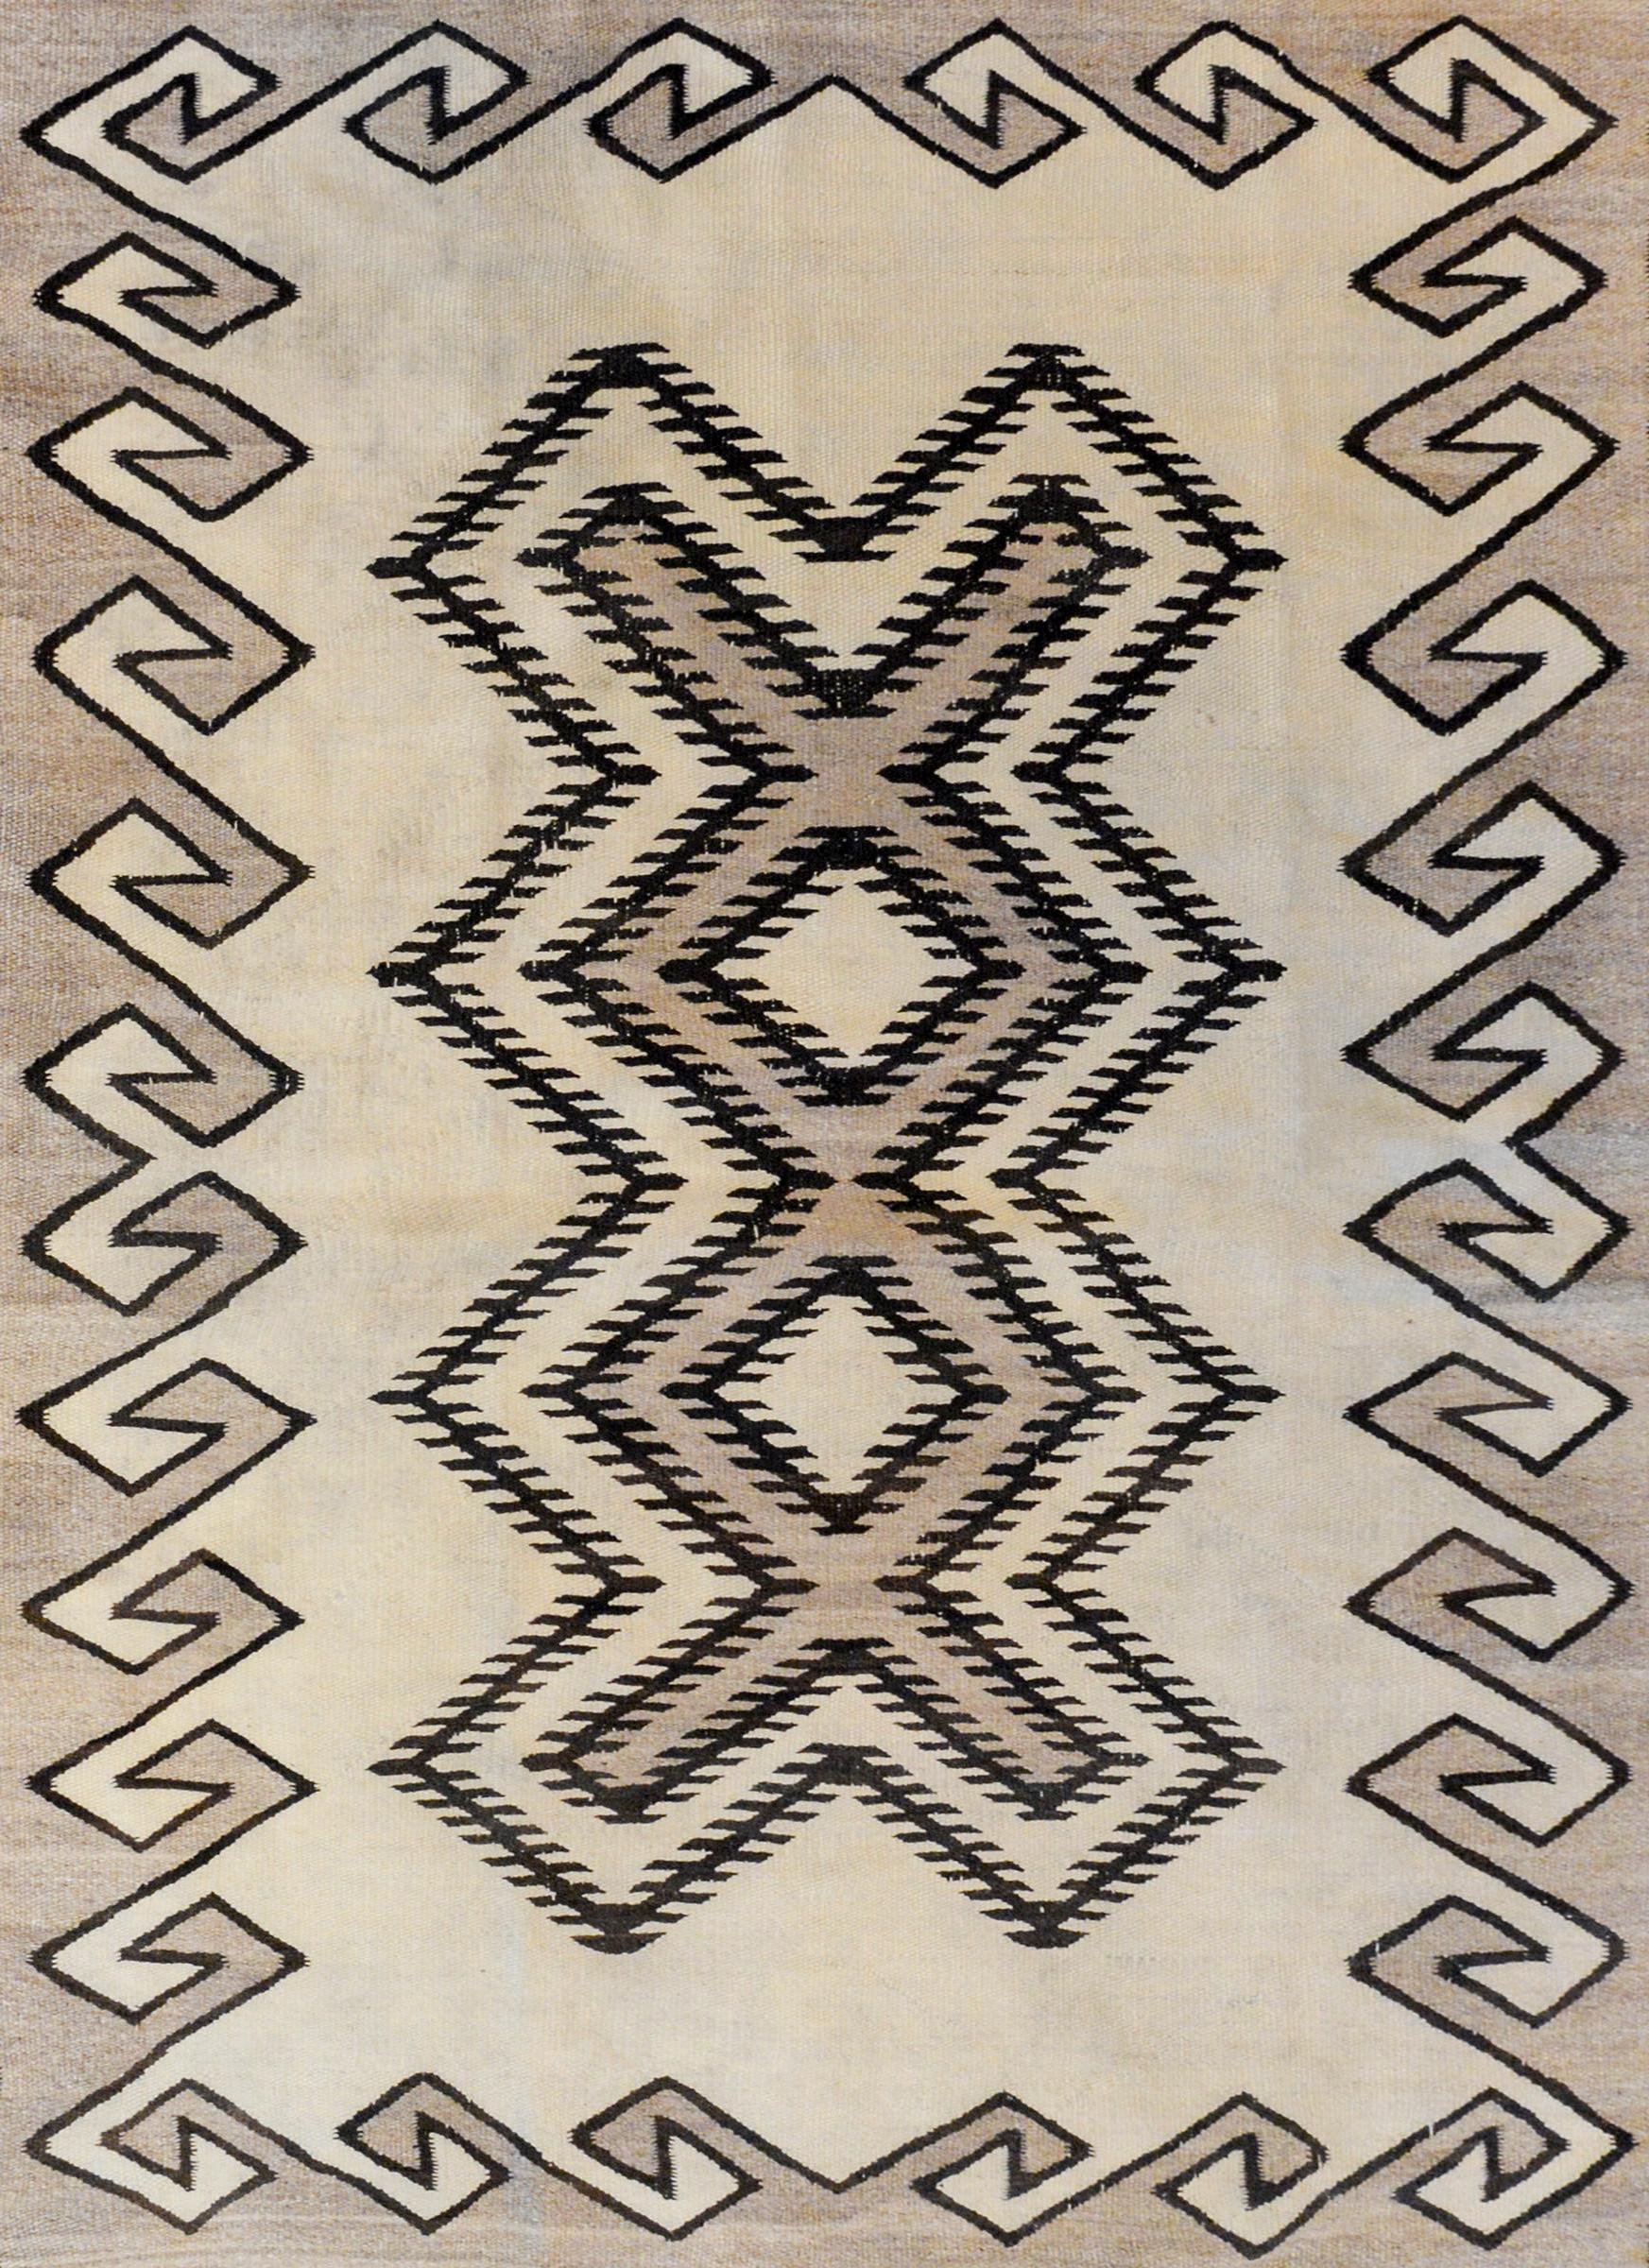 A wonderful early 20th century Navajo woven with a bold large-scale geometric pattern across the field surrounded by a complex border of waves and a meandering motif, all woven in natural undyed wool.